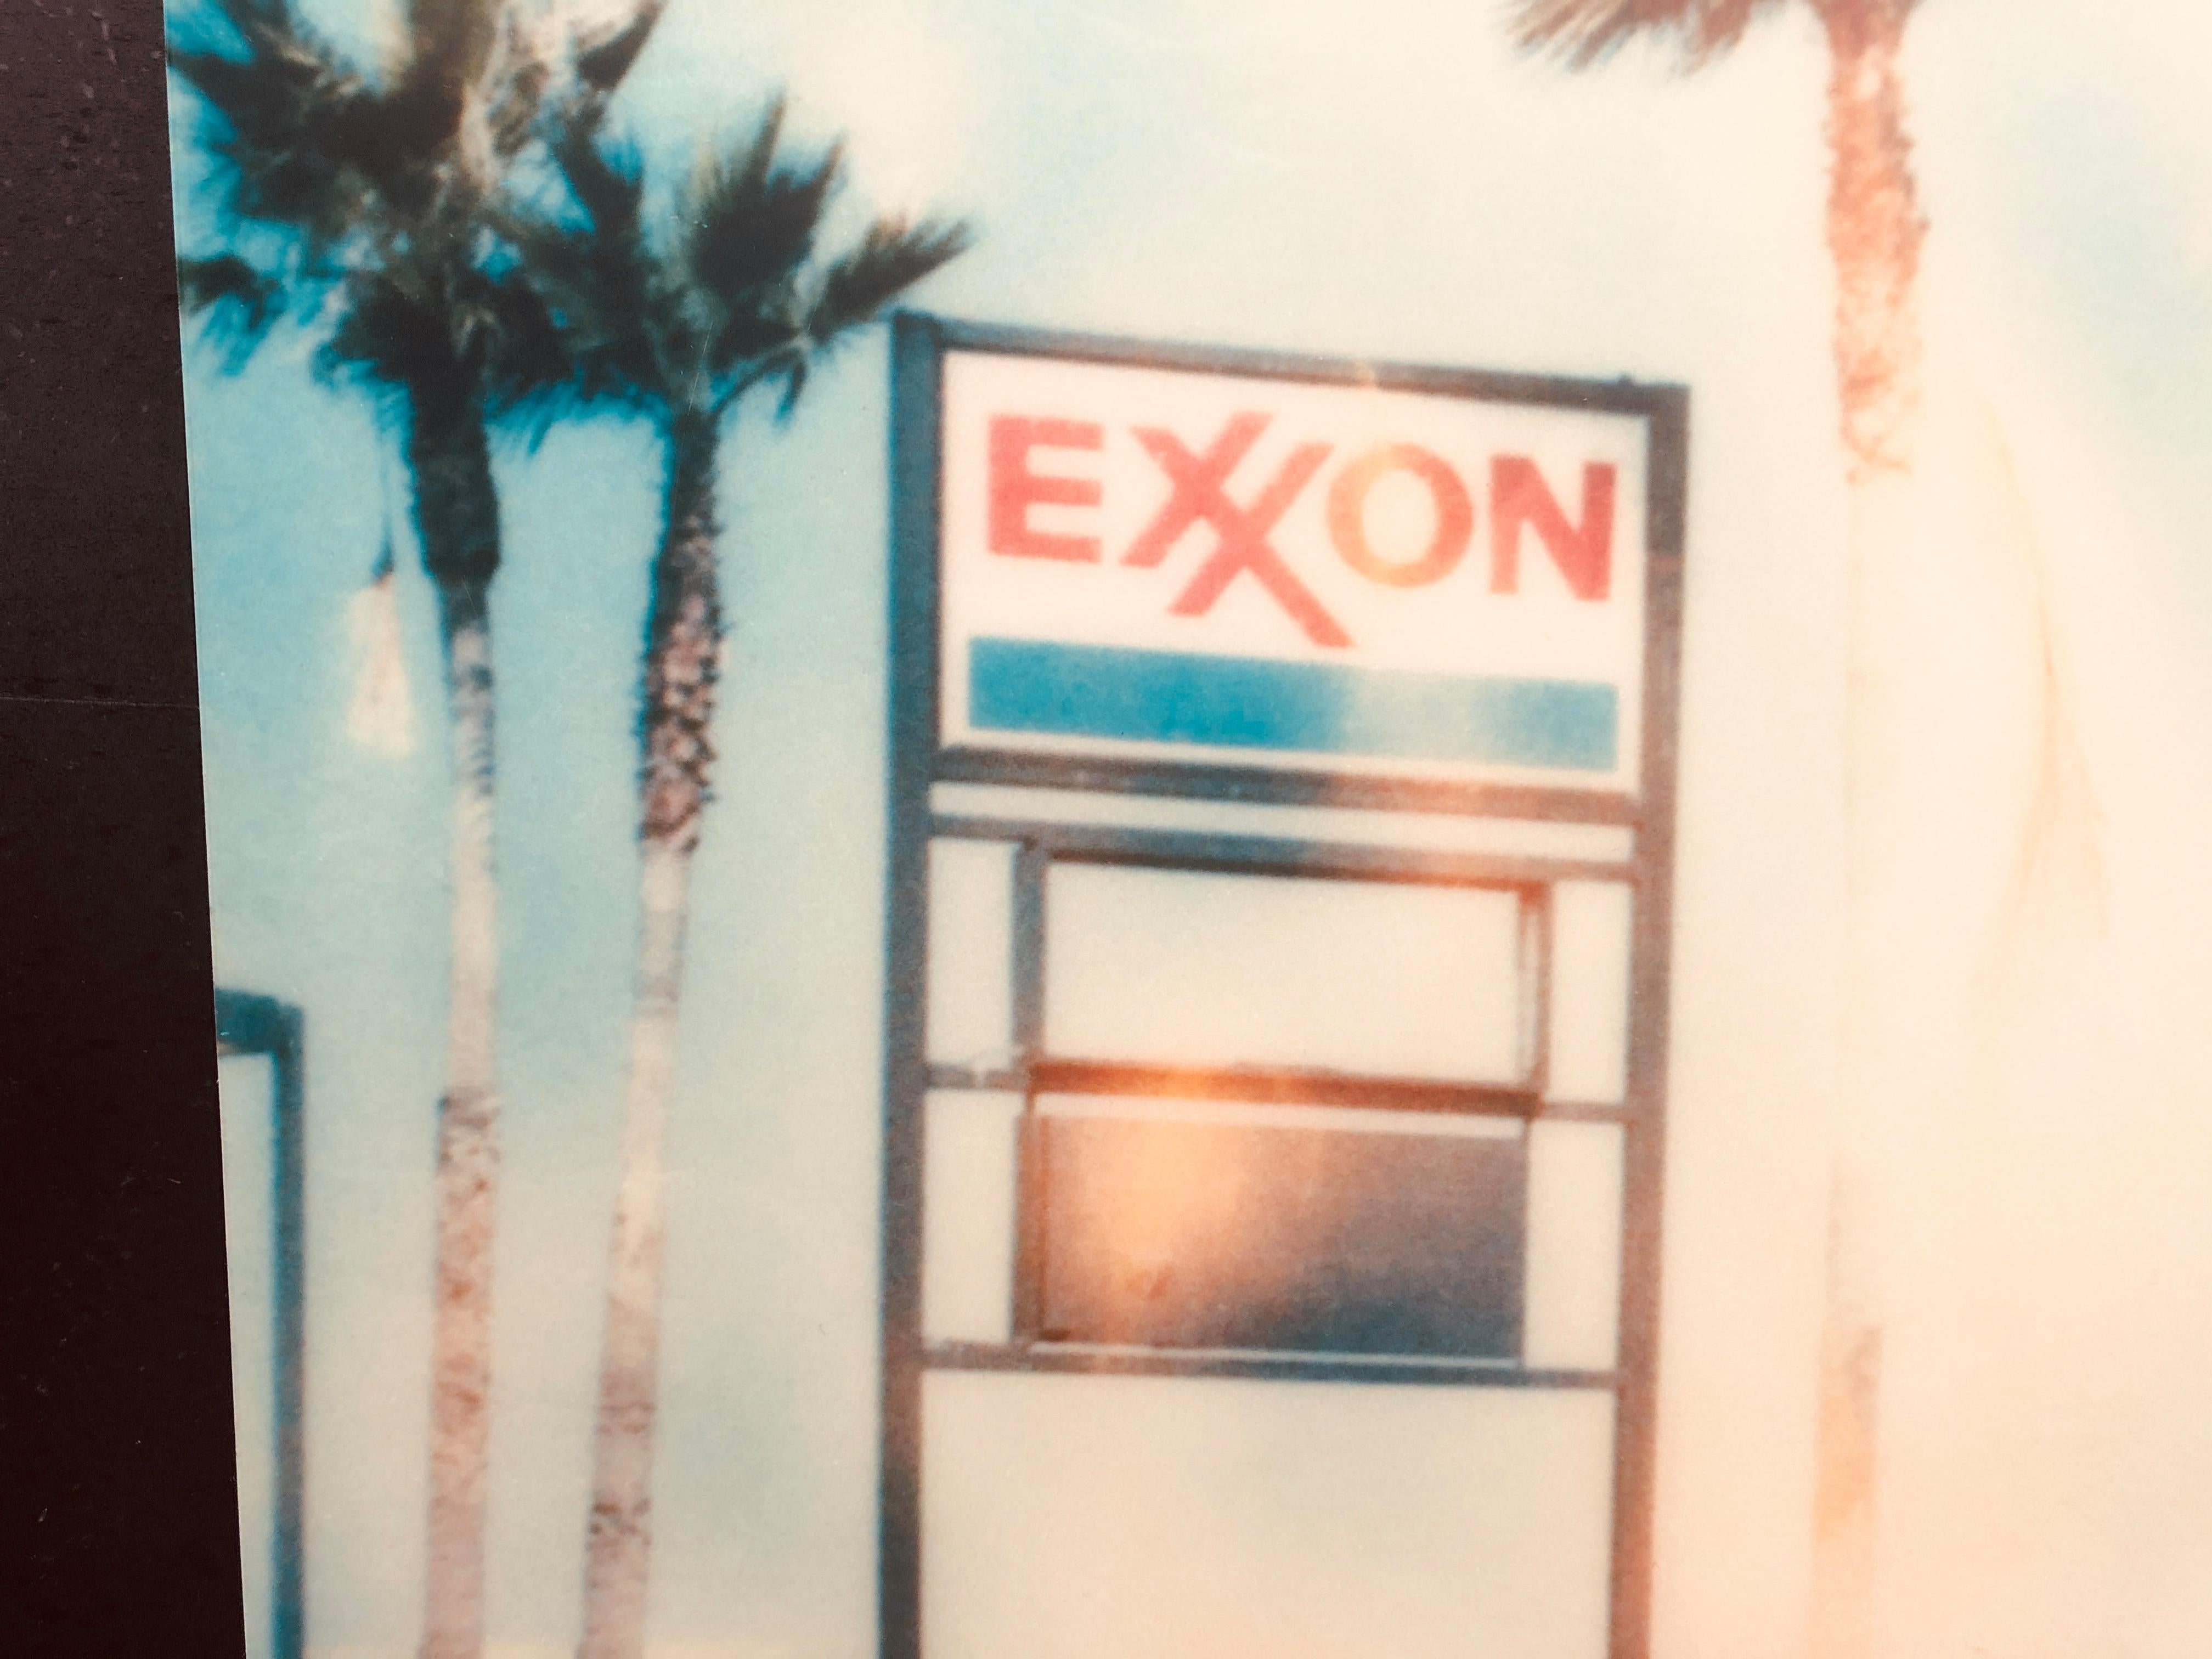 Exxon (Stranger than Paradise) - 1999

58x57cm, 
Edition of 10 (last Edition), plus 2 Artist Proofs. 
Analog C-Print, hand-printed by the artist on Fuji Crystal Archive Paper, based on the Polaroid. 
Signed on verso with Certificate. 
Artist